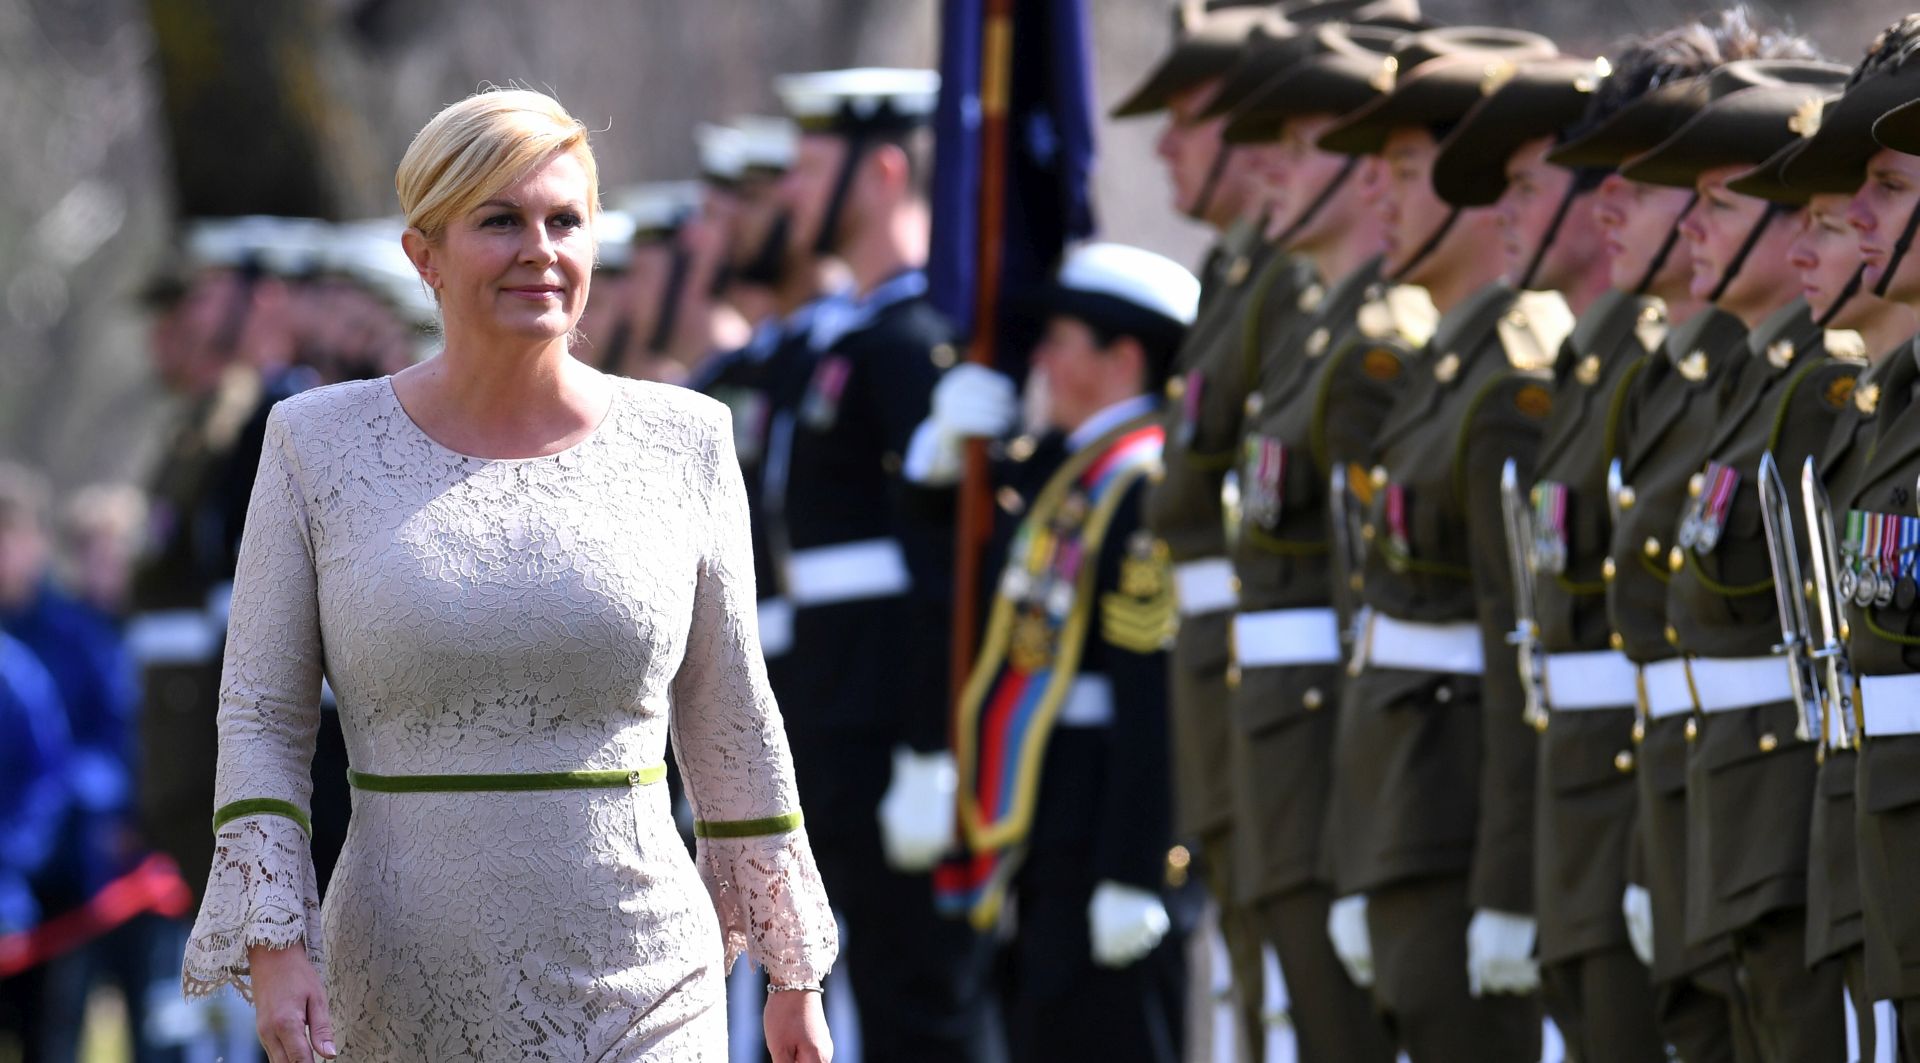 epa06144935 President of Croatia Kolinda Grabar-Kitarovic inspects the guard of honour during a ceremonial welcome at the Government House in Canberra, Australia, 15 August 2017. Grabar-Kitarovic is on a state visit to Australia and New Zealand, the first Croatian president to do so in 22 years.  EPA/LUKAS COCH  AUSTRALIA AND NEW ZEALAND OUT